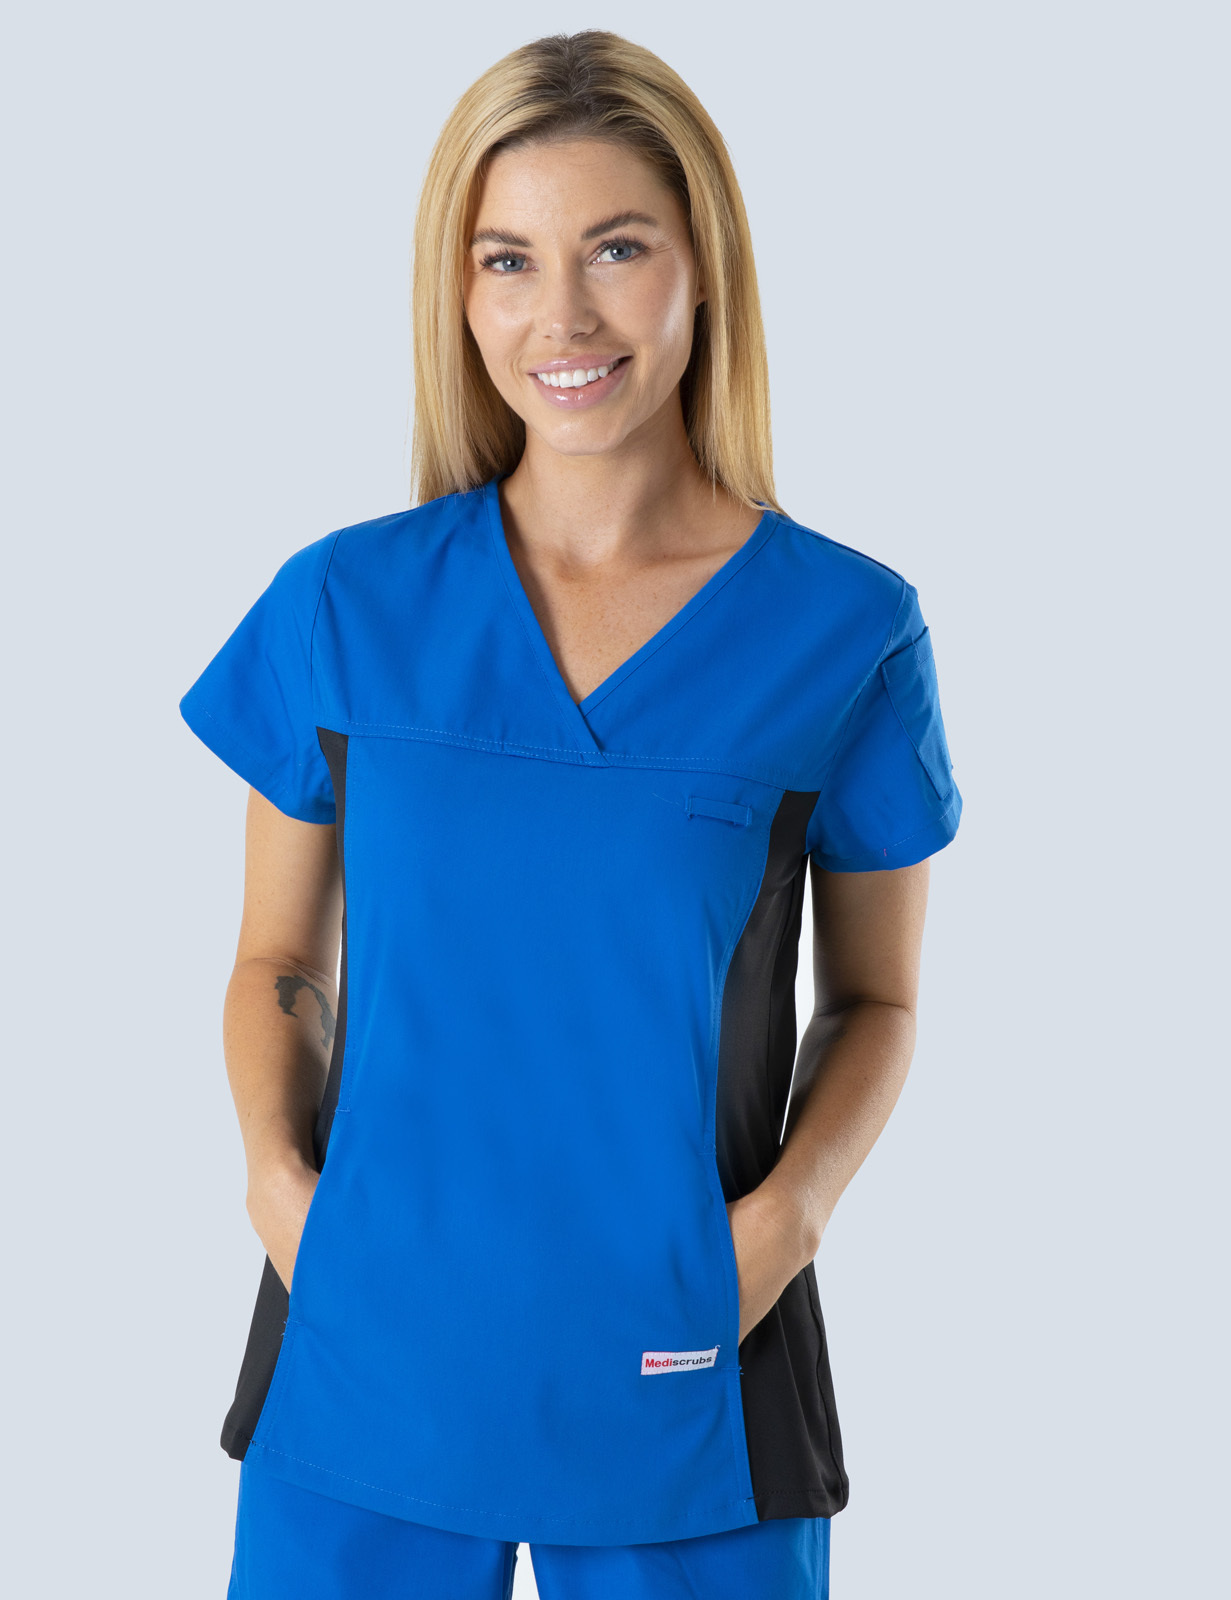 Ashmore Retreat Registered Nurse Top Only Bundle (Women's Fit Spandex in Royal incl Logo) 